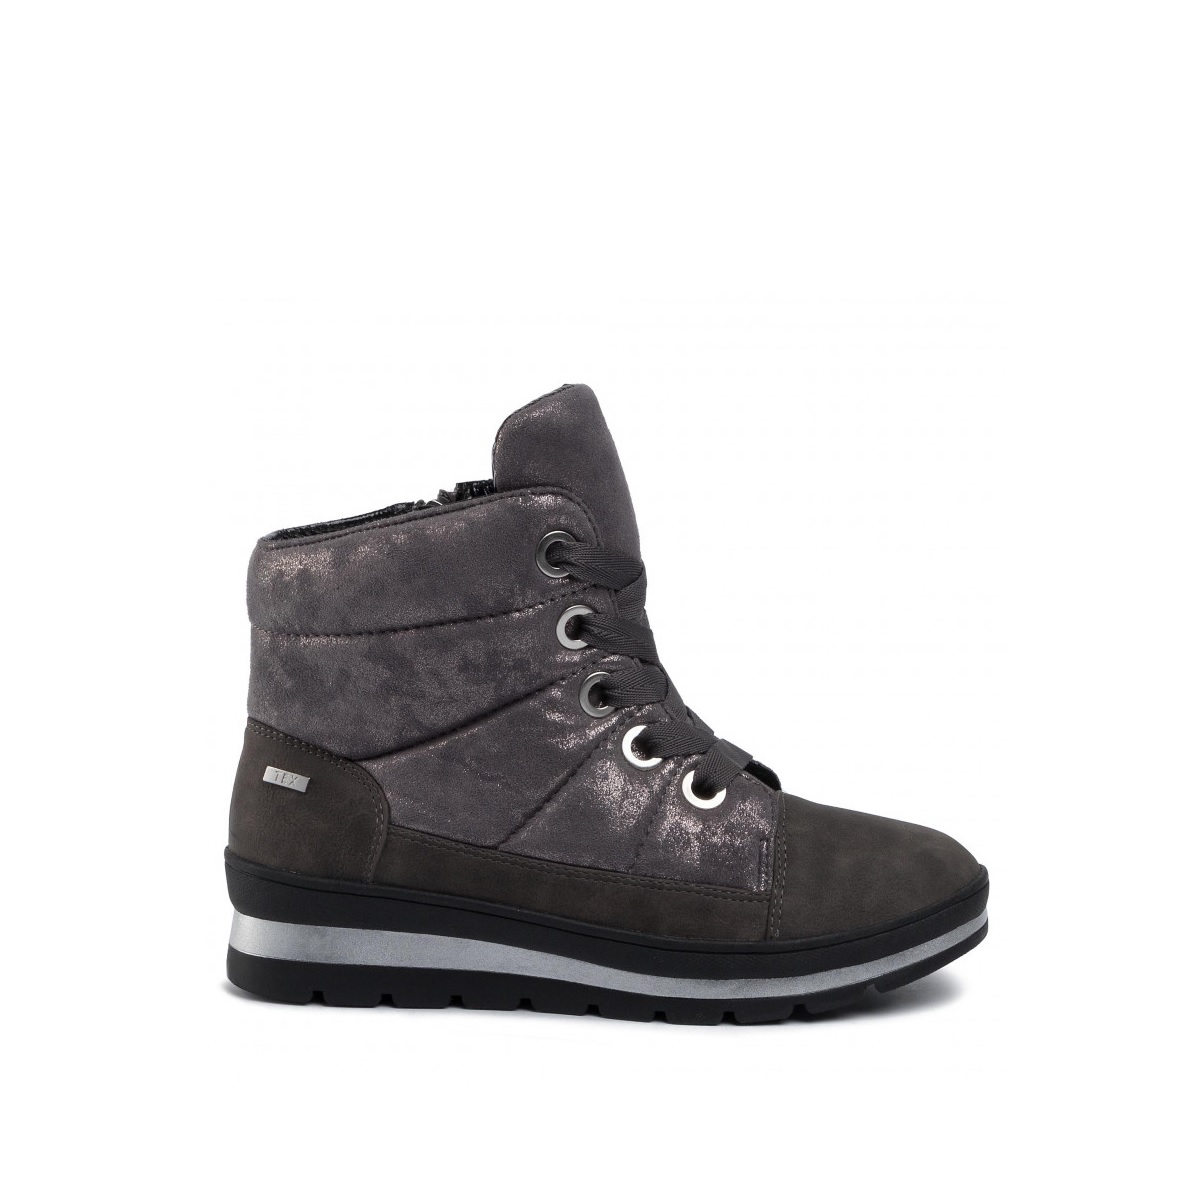 Caprice Ladies Grey Waterproof Ankle Boot - County Shoes Dorchester